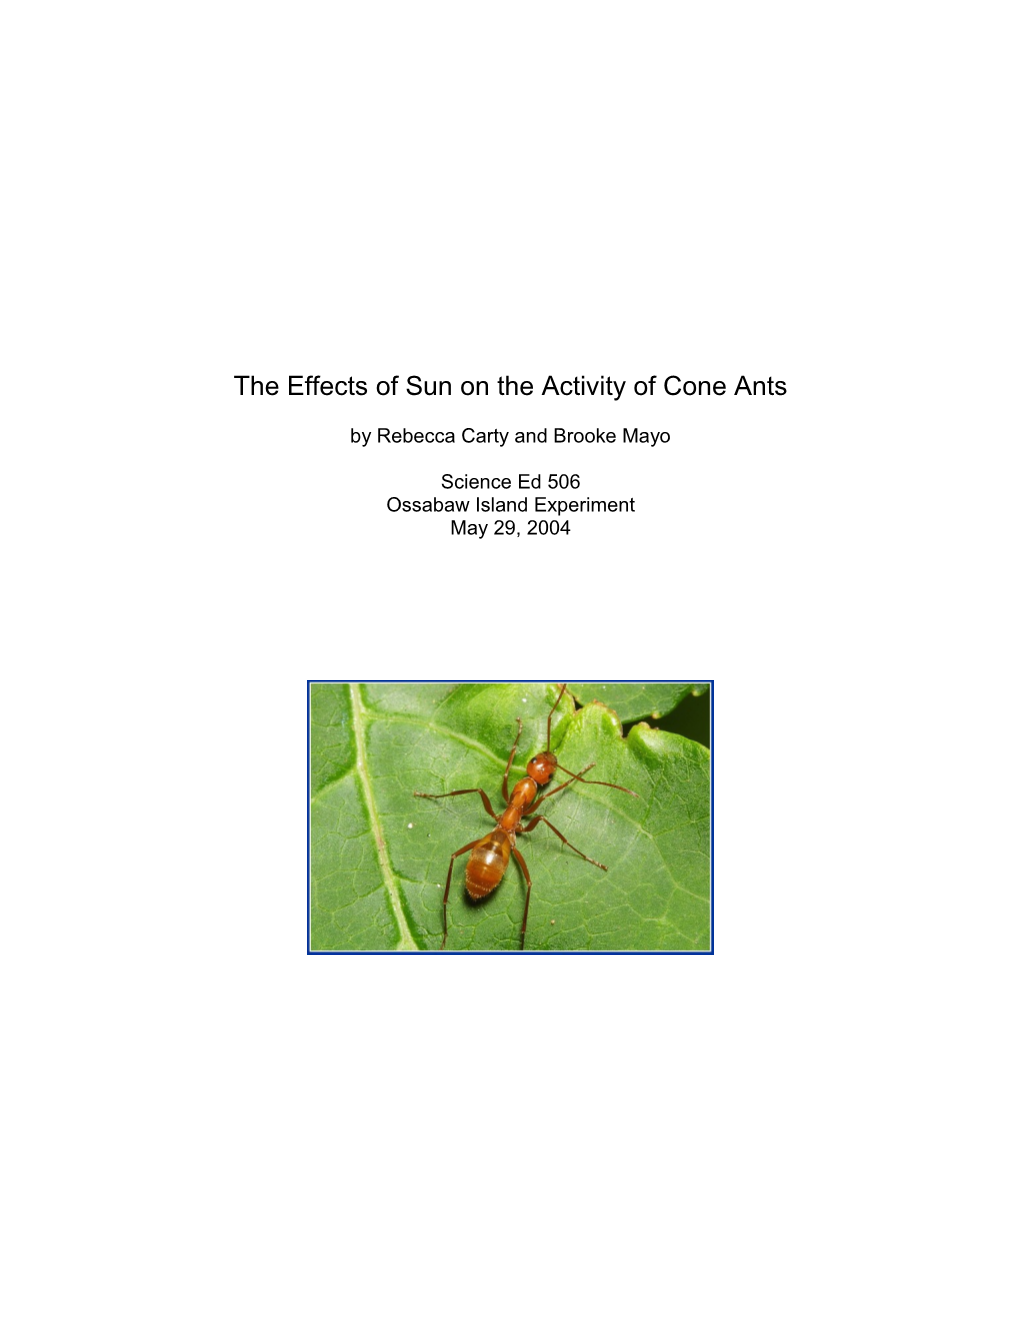 The Effects of Sun on the Activity of Cone Ants